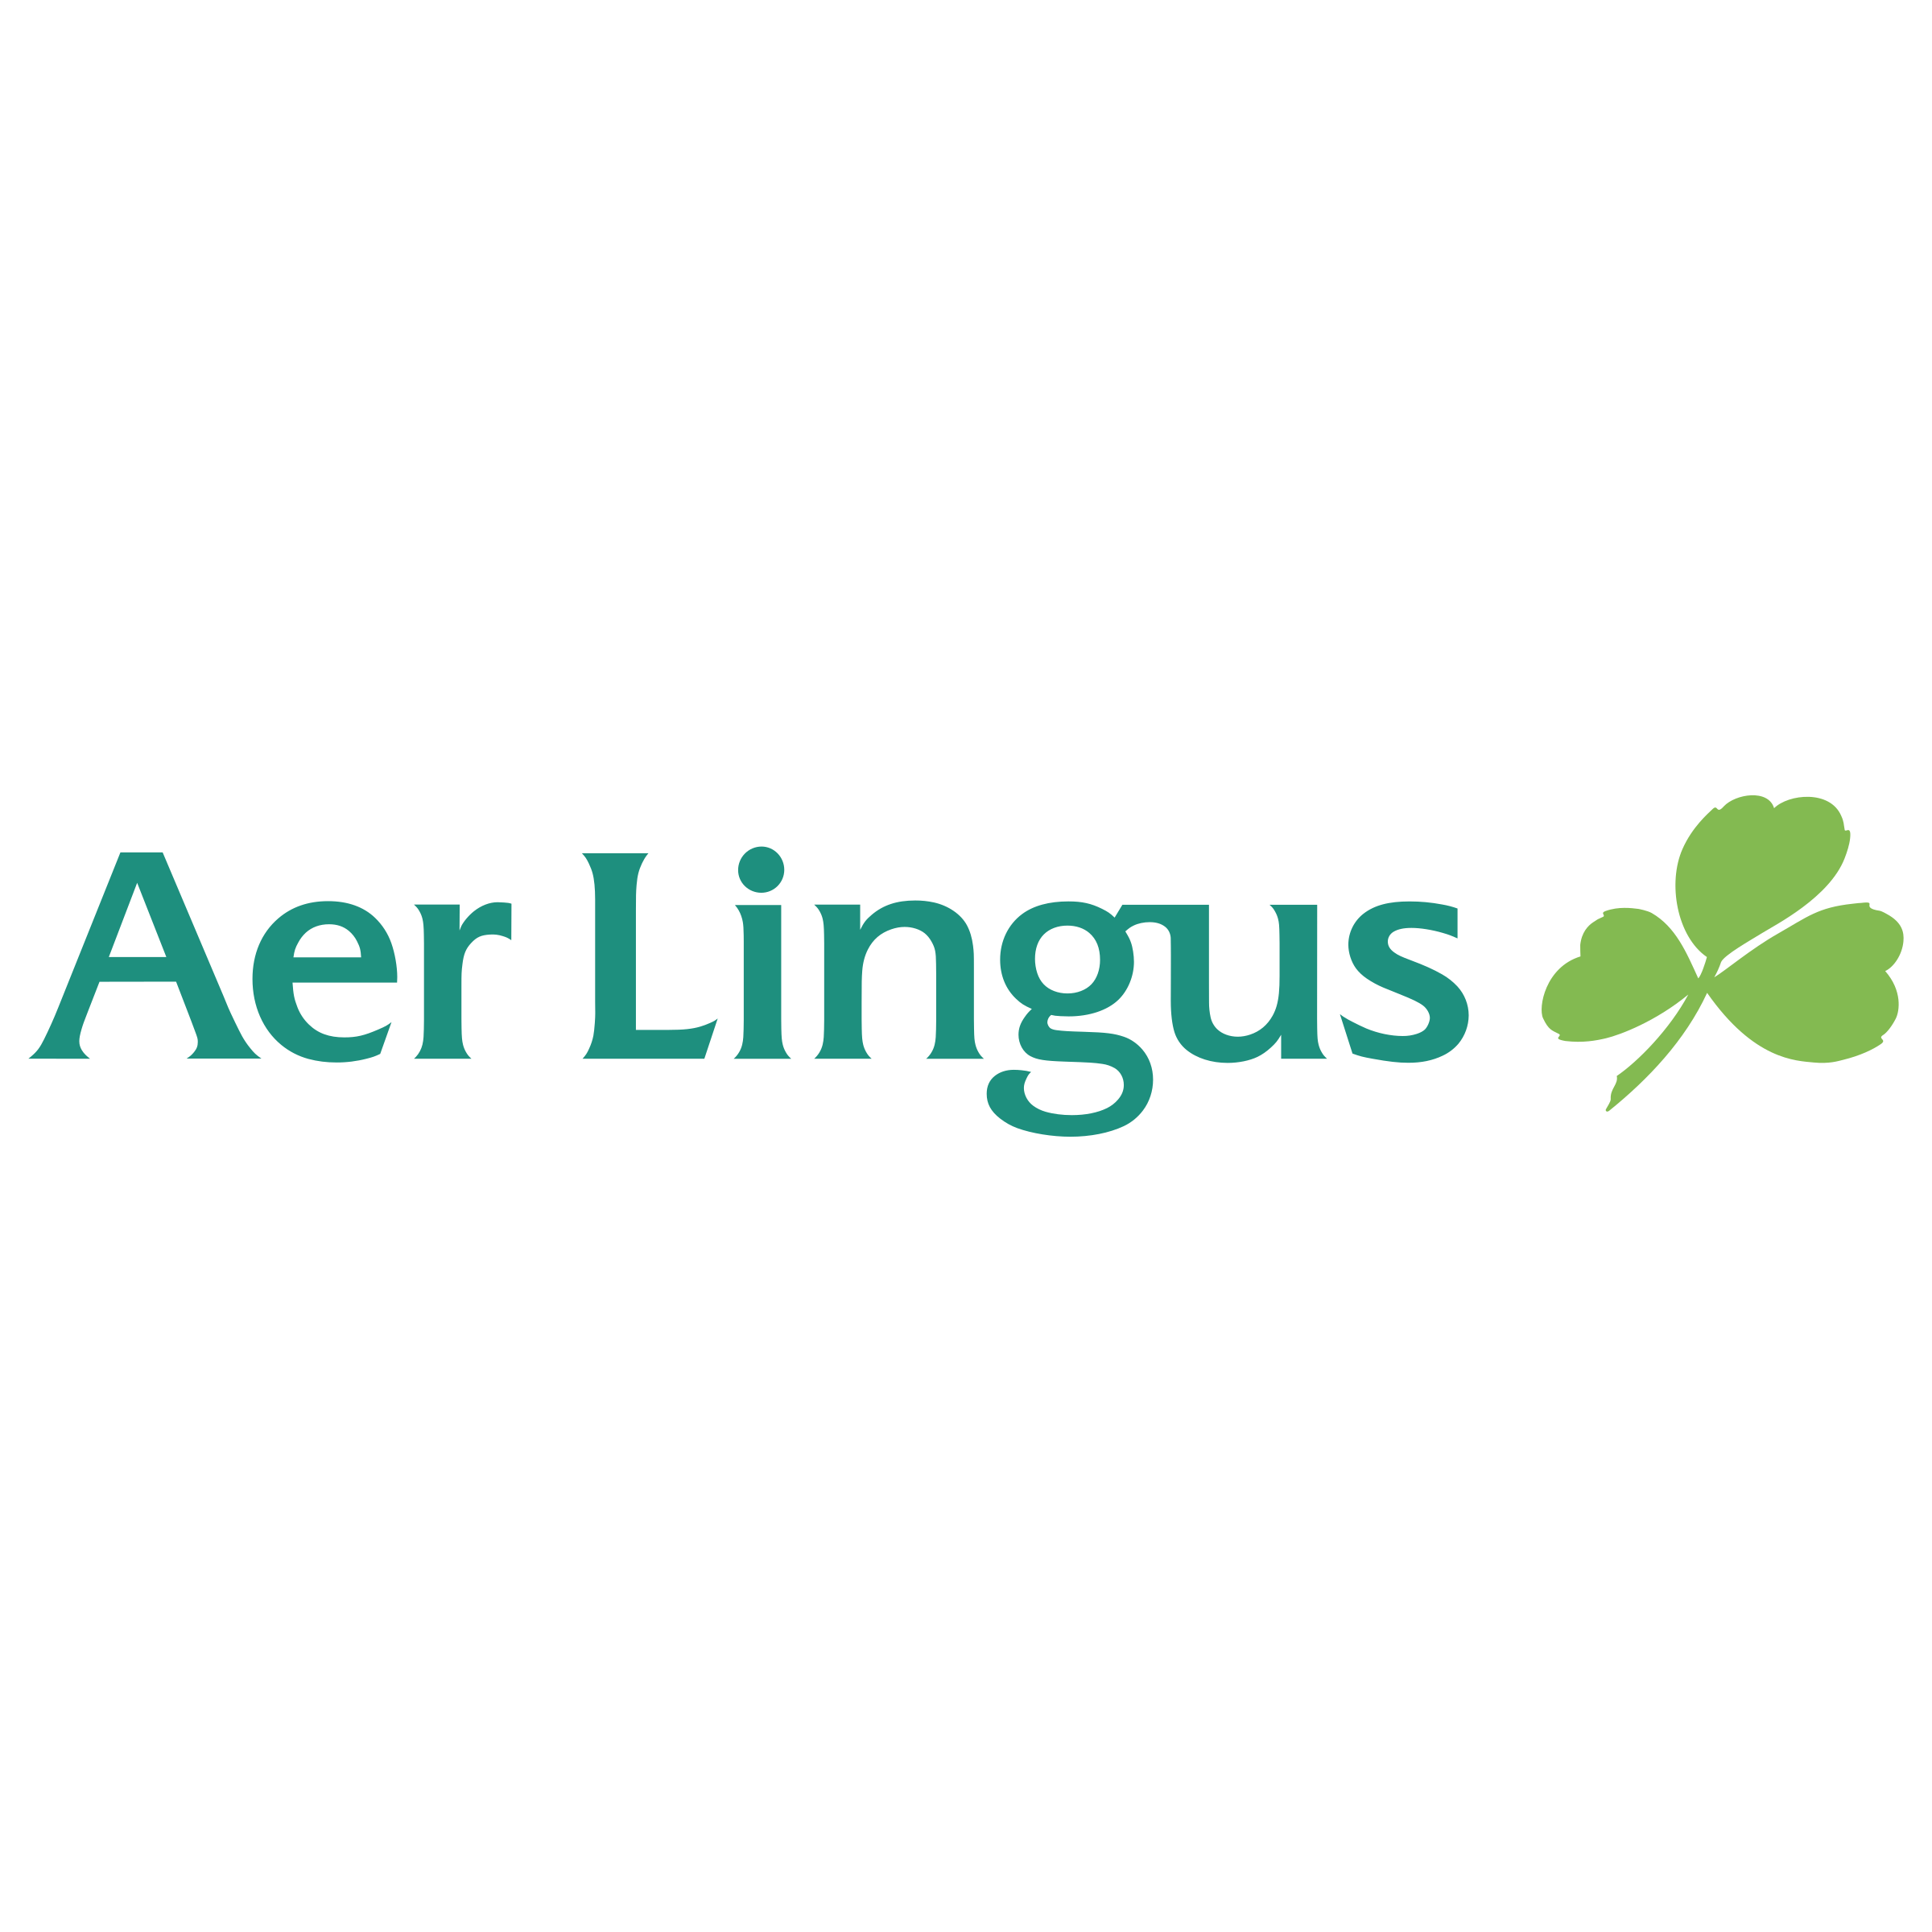 National airline of Ireland